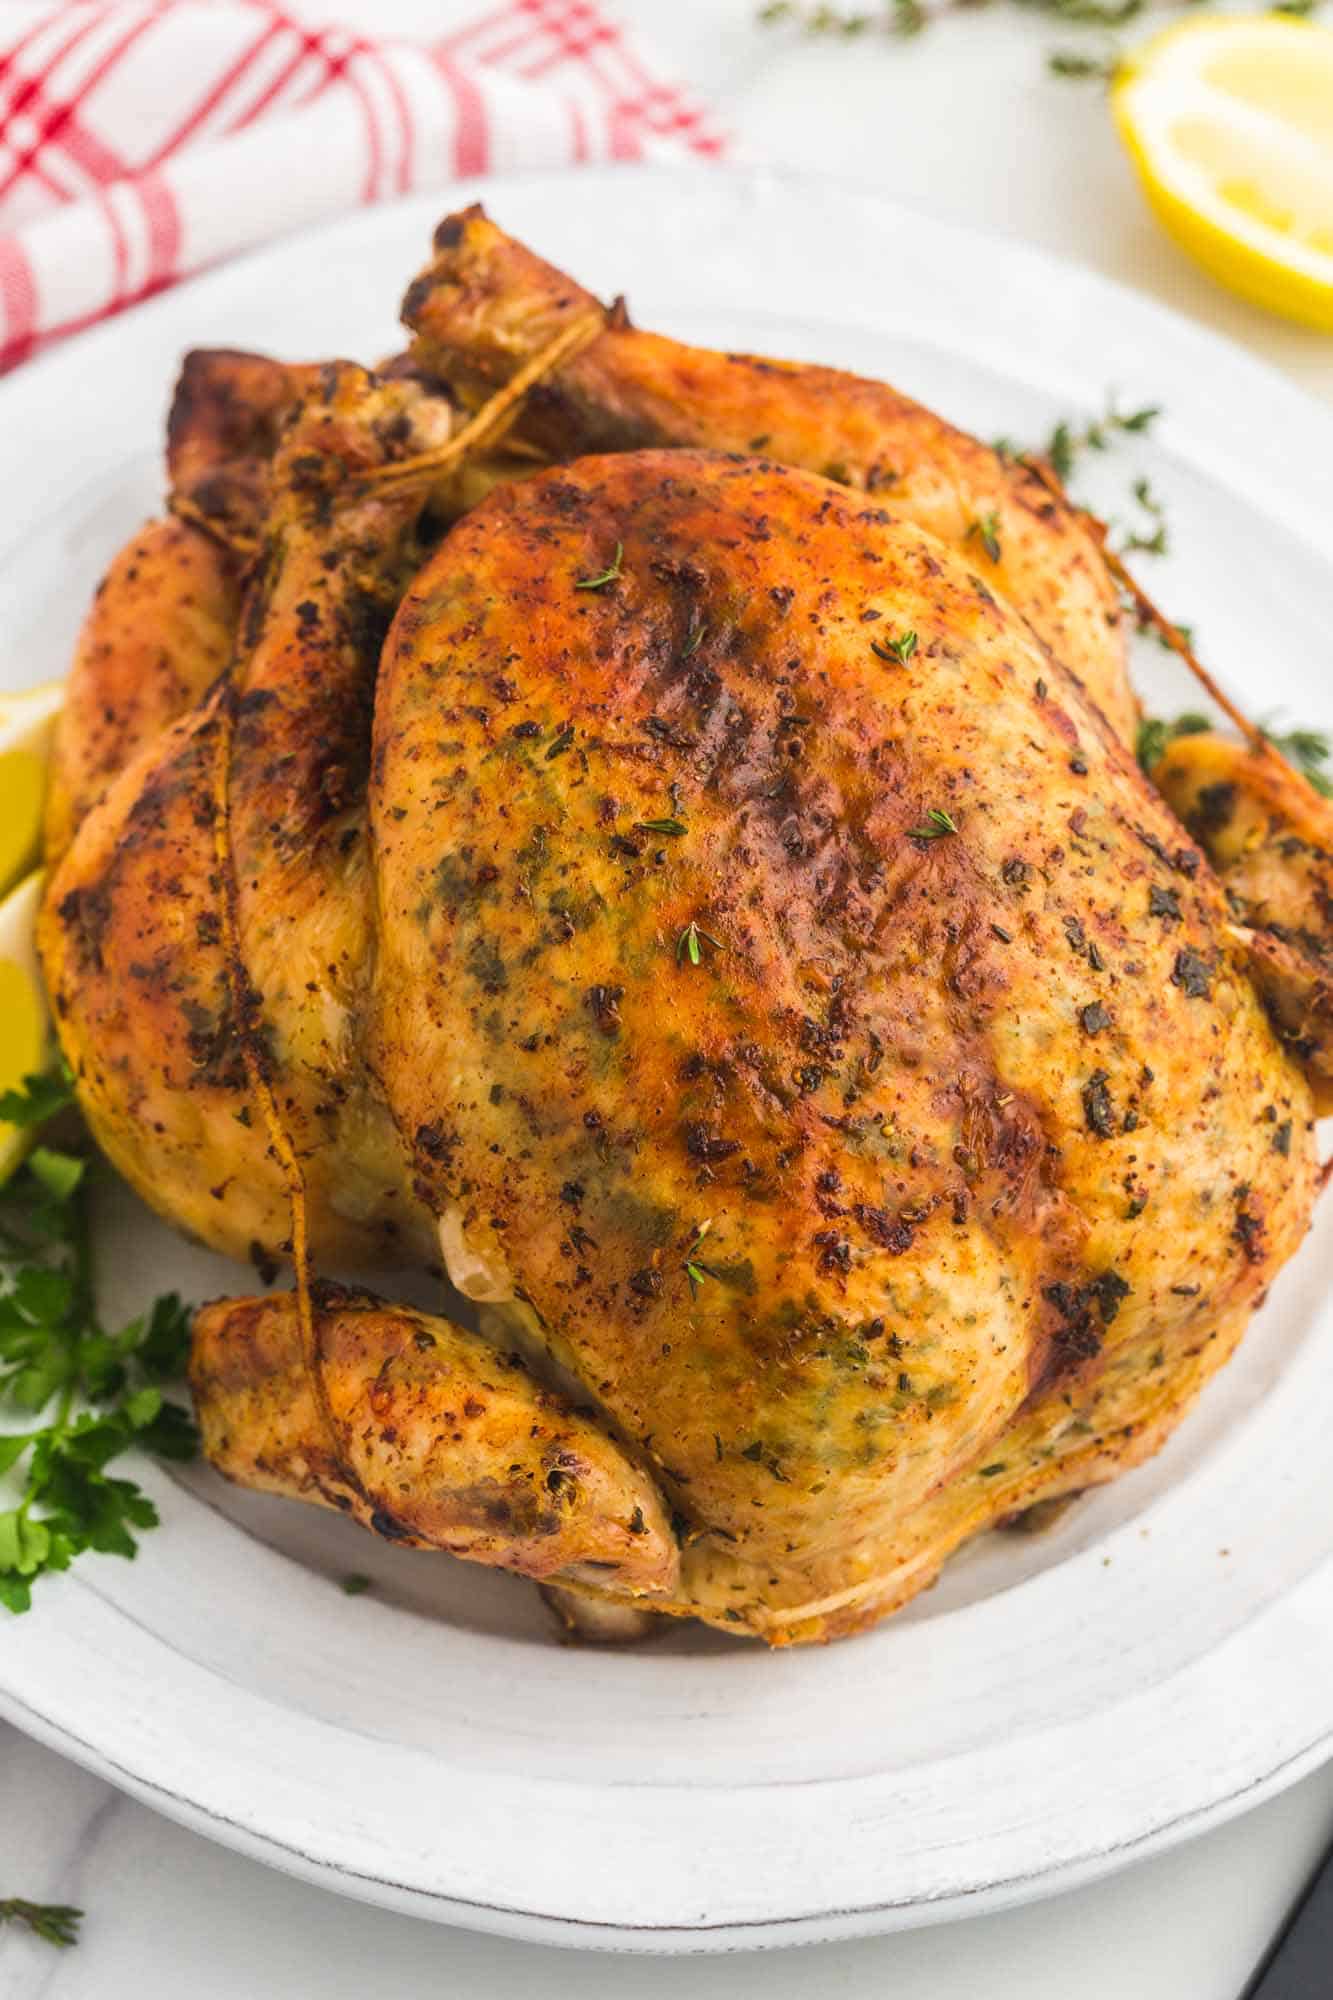 Garlic butter herb roast chicken served on a round platter, with lemon and parsley on the side.